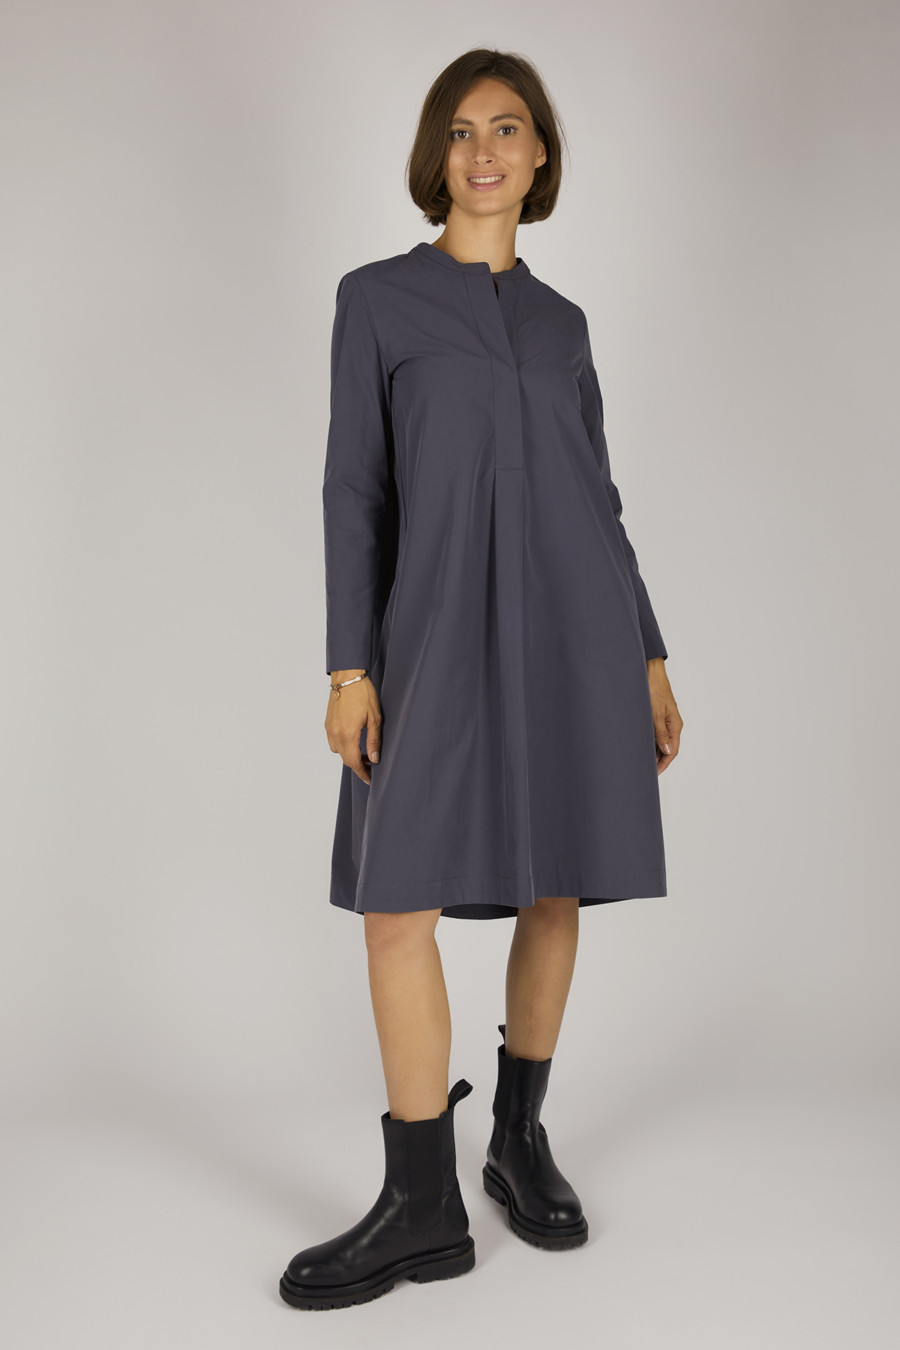 GLADIS – Casual shirt blouse dress with round neck – Color: Slate